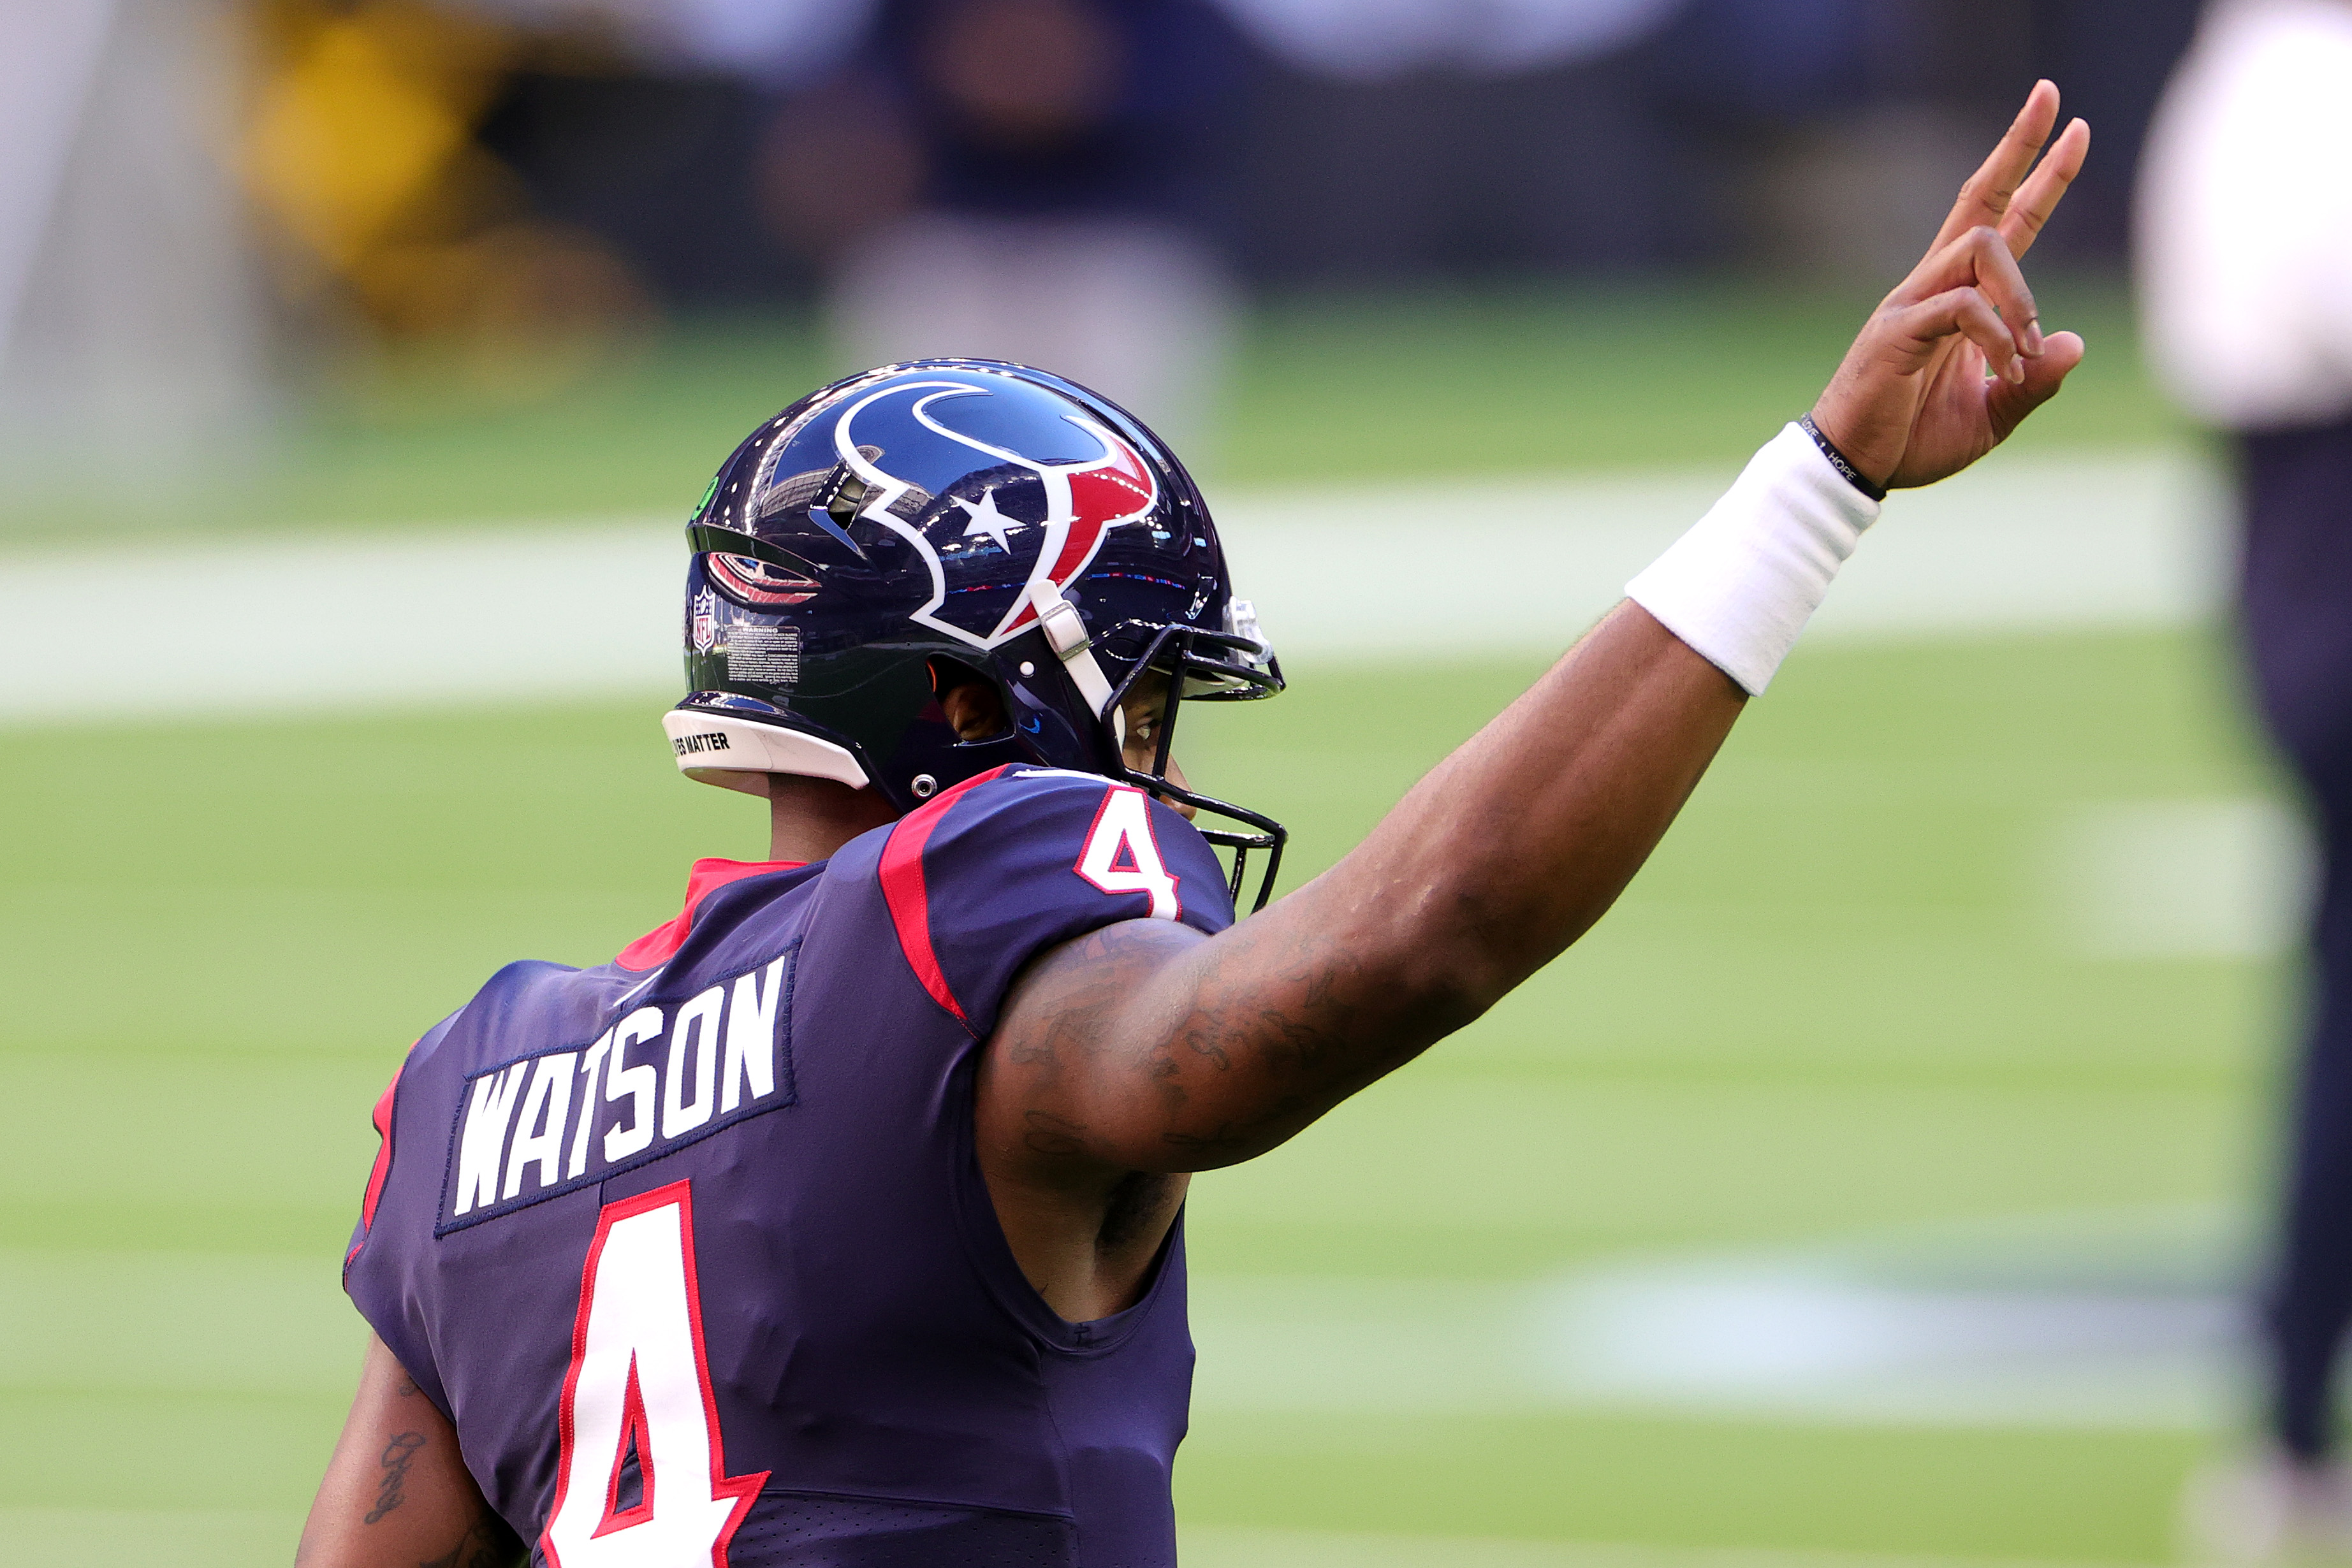 Deshaun Watson May Want the Denver Broncos, but Why Would They Want Him?